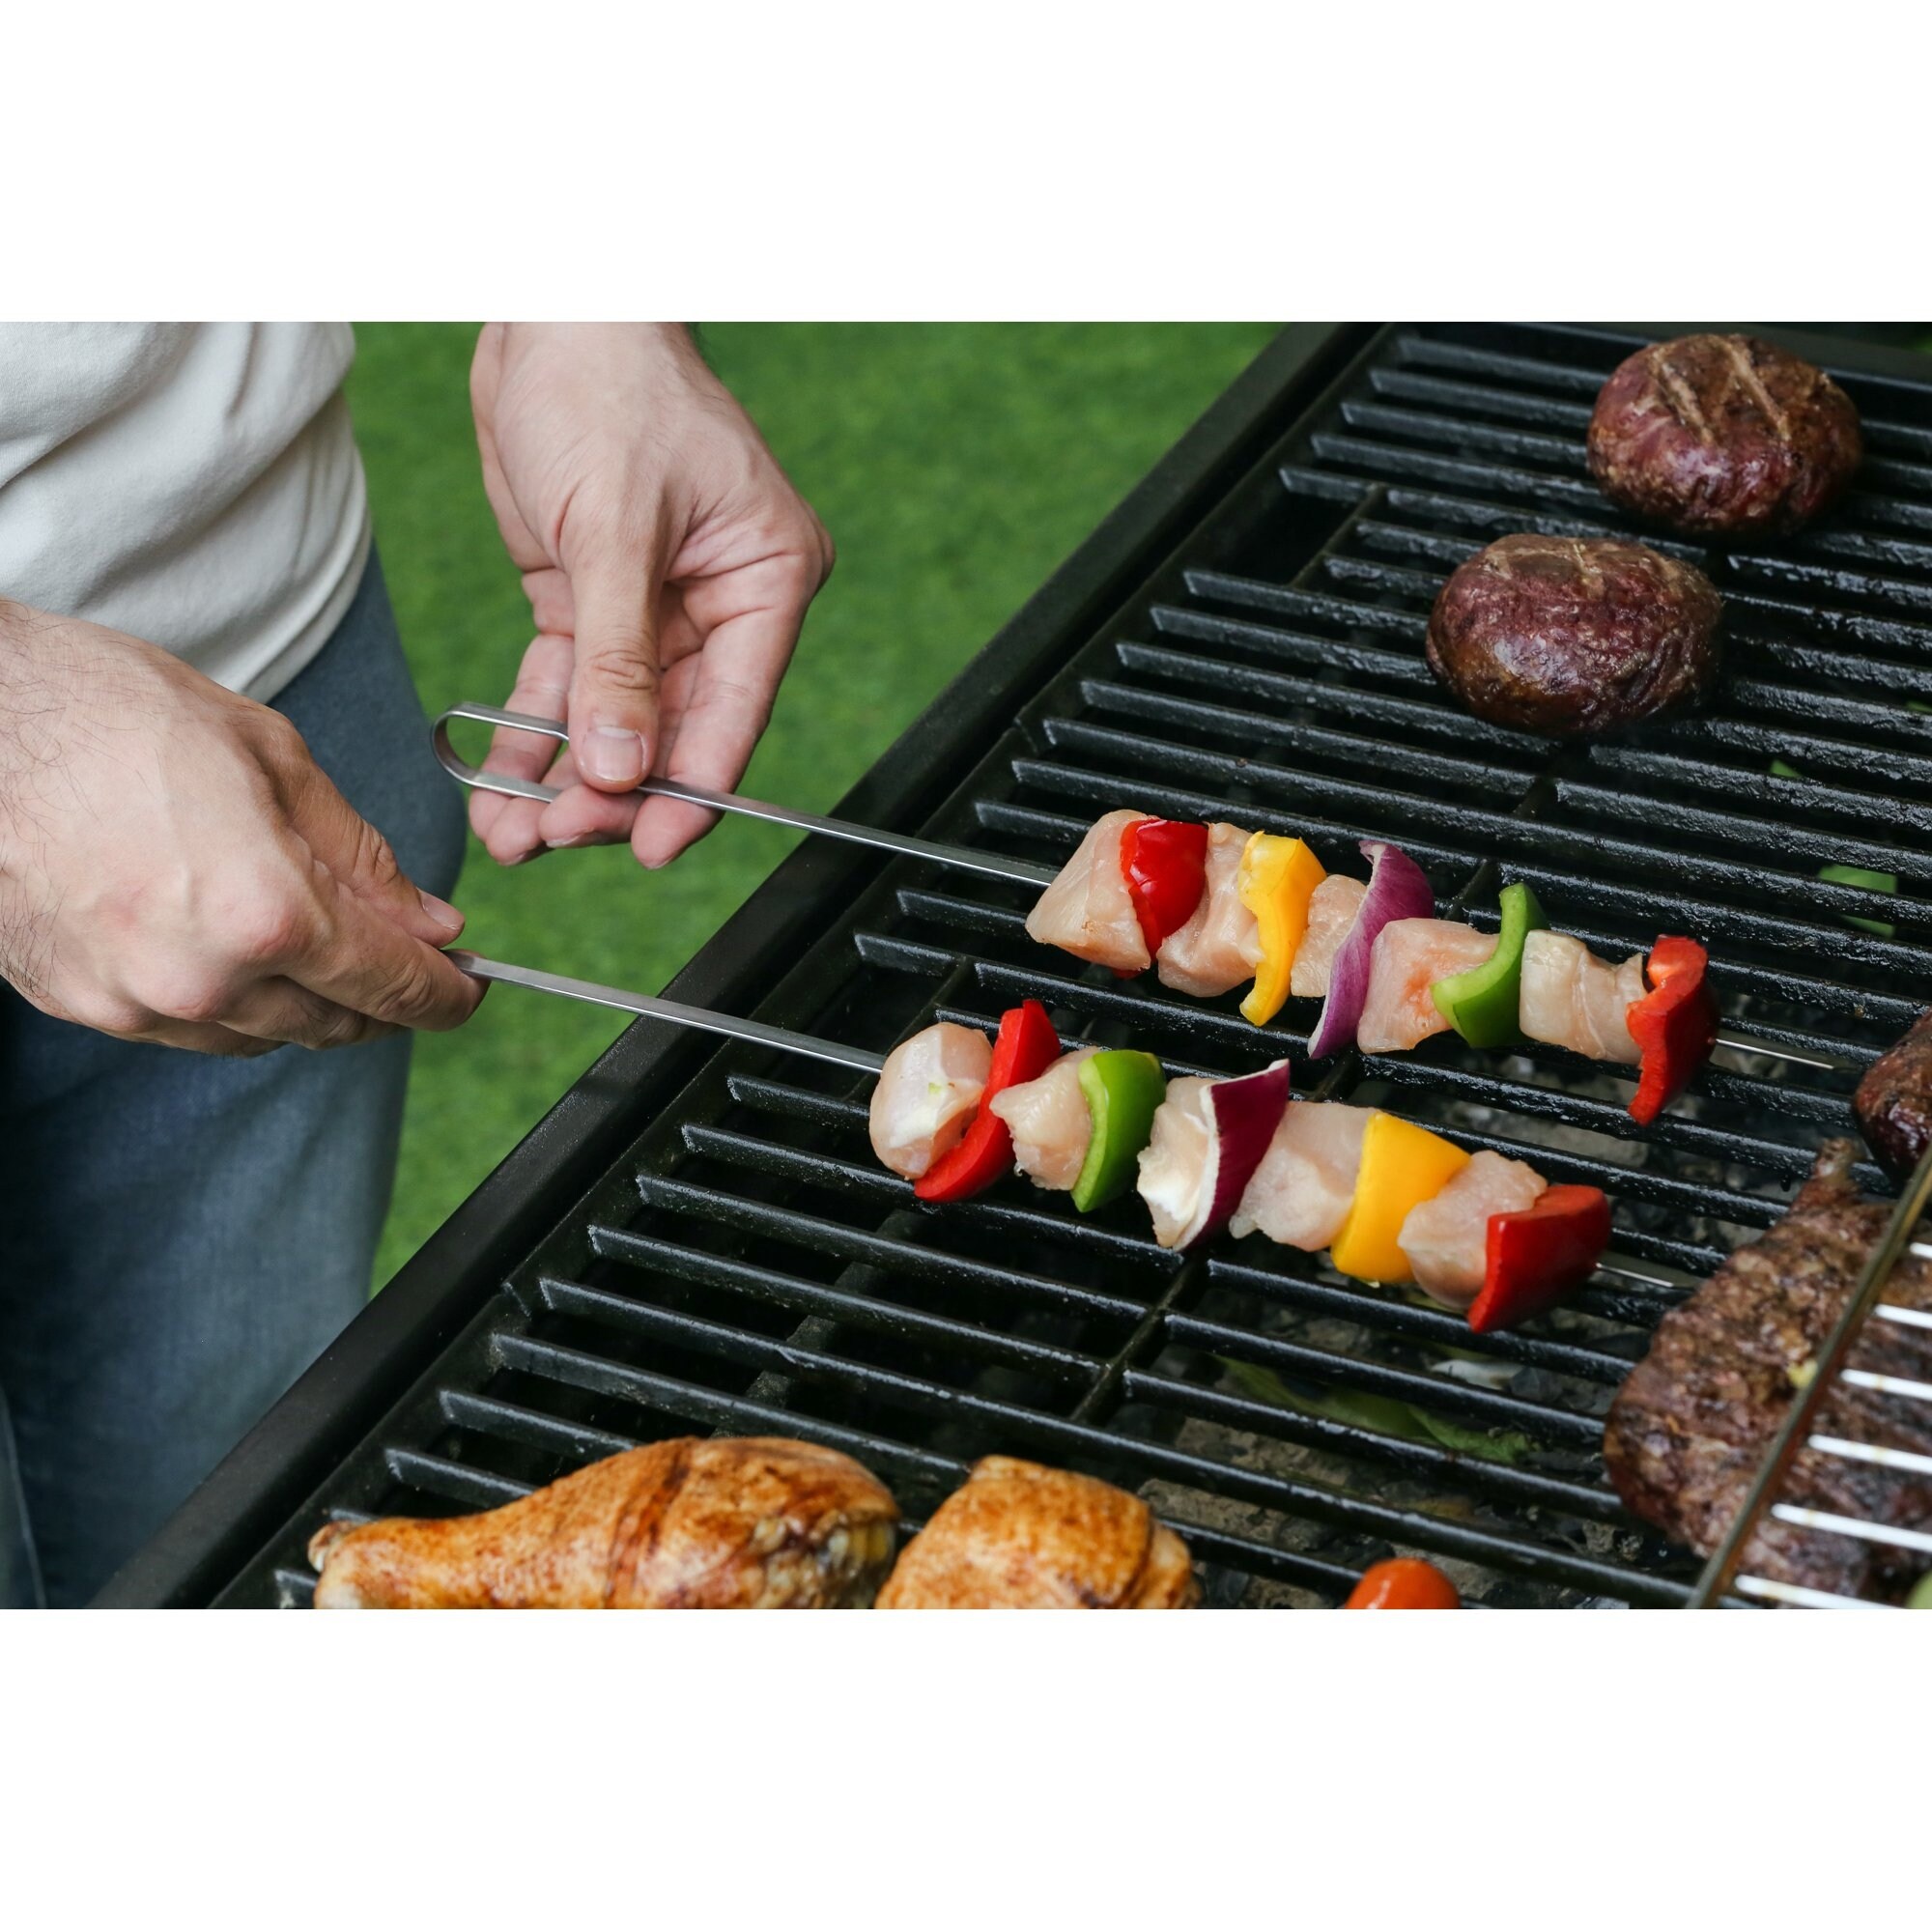 https://ak1.ostkcdn.com/images/products/is/images/direct/3bed8291176baecb0819478ce36ce89a14fcf885/Essential-BBQ-Tool-Set-for-Easy-cooking%2C-12-Piece.jpg